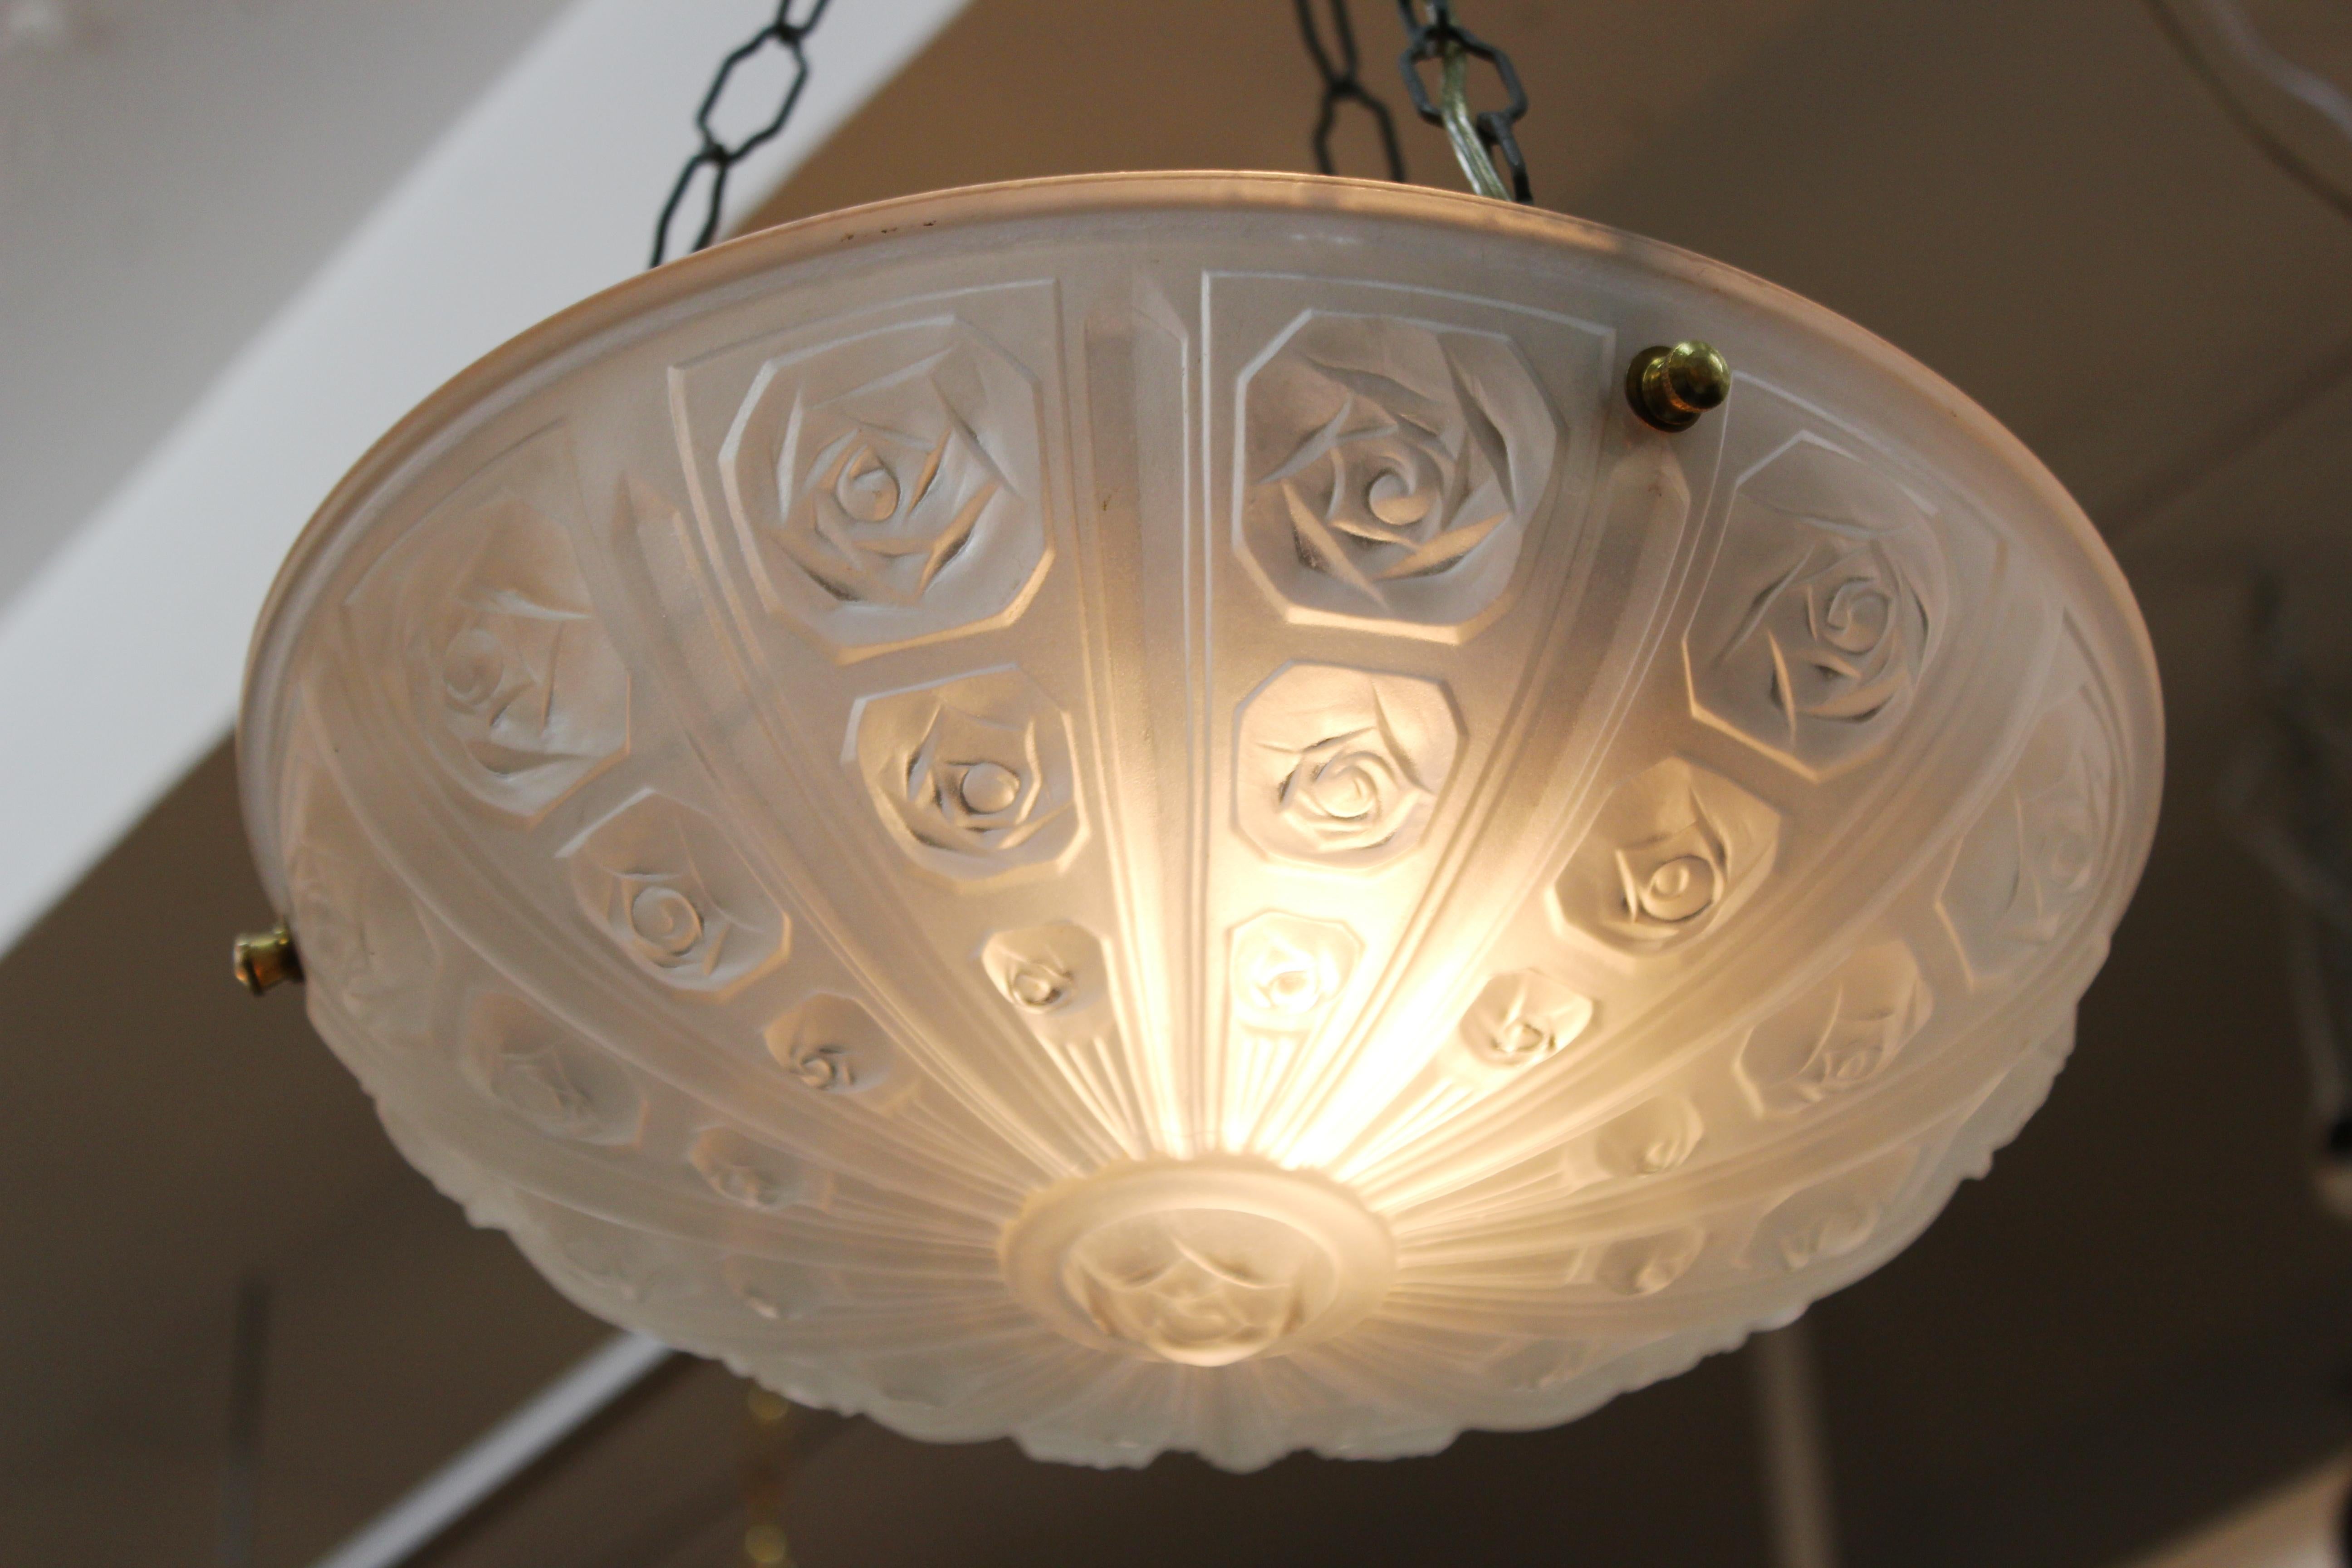 French Art Deco ceiling pendant light with a floral themed relief frosted glass bowl attached to three brass chains and a canopy piece. The piece has been newly rewired and the glass bowl itself has never been used before. Made in France during the